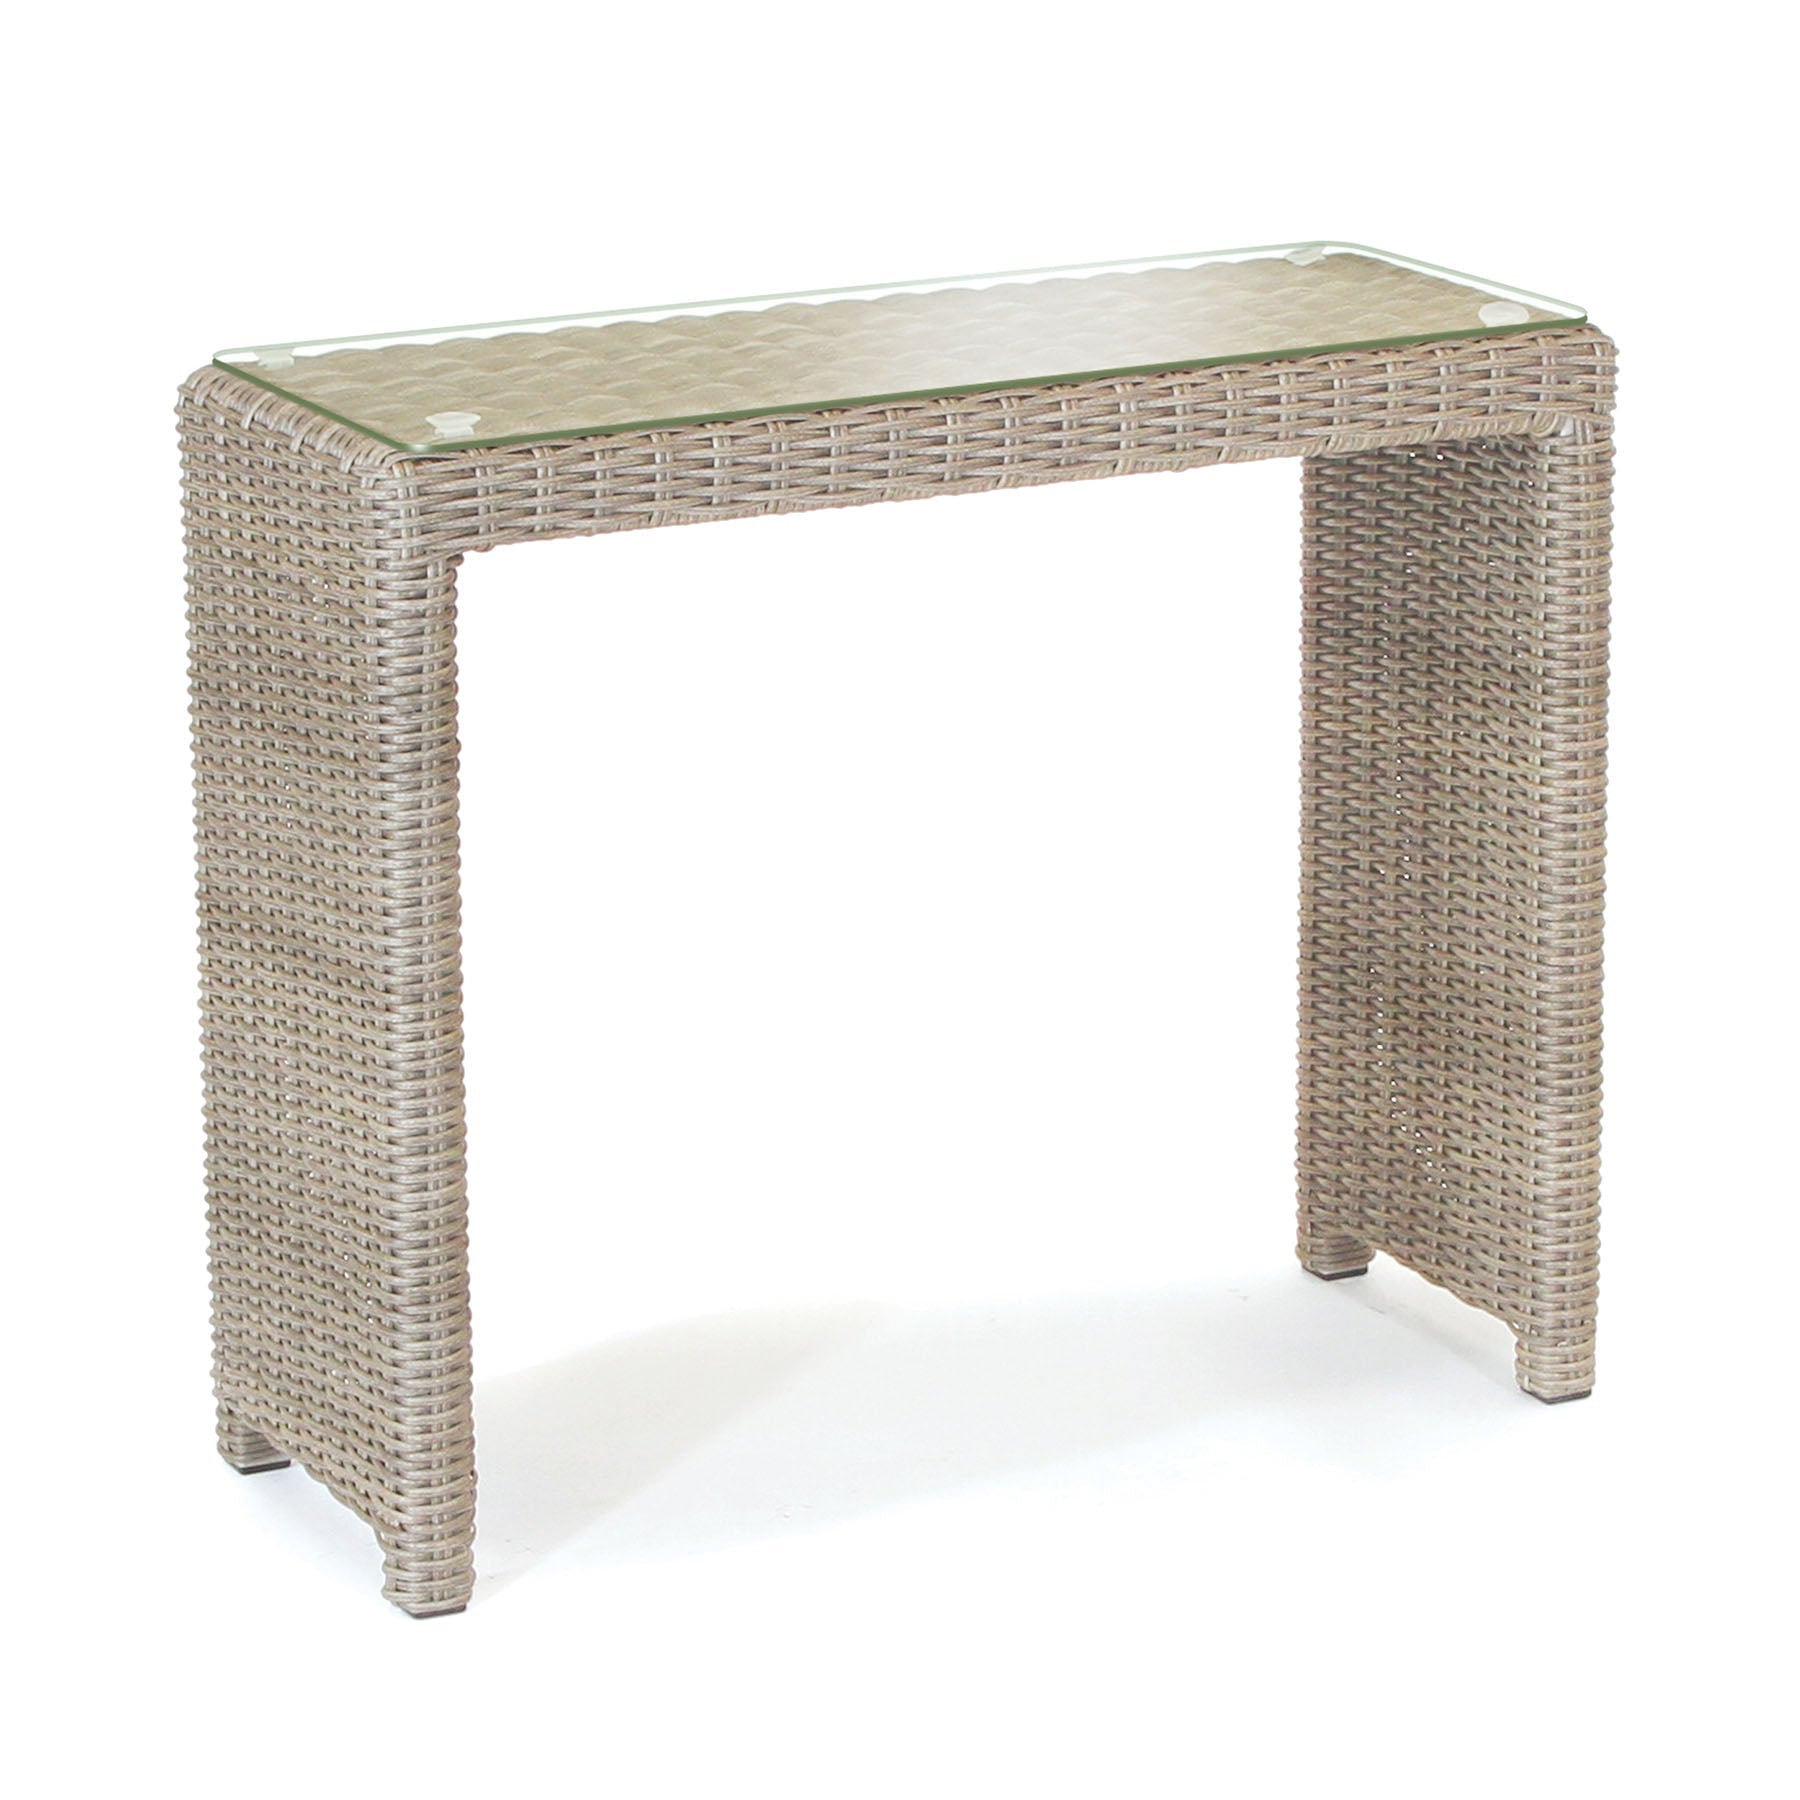 Kettler Palma Oyster Wicker Casual Dining Glass Top Side Table *Damaged Box*